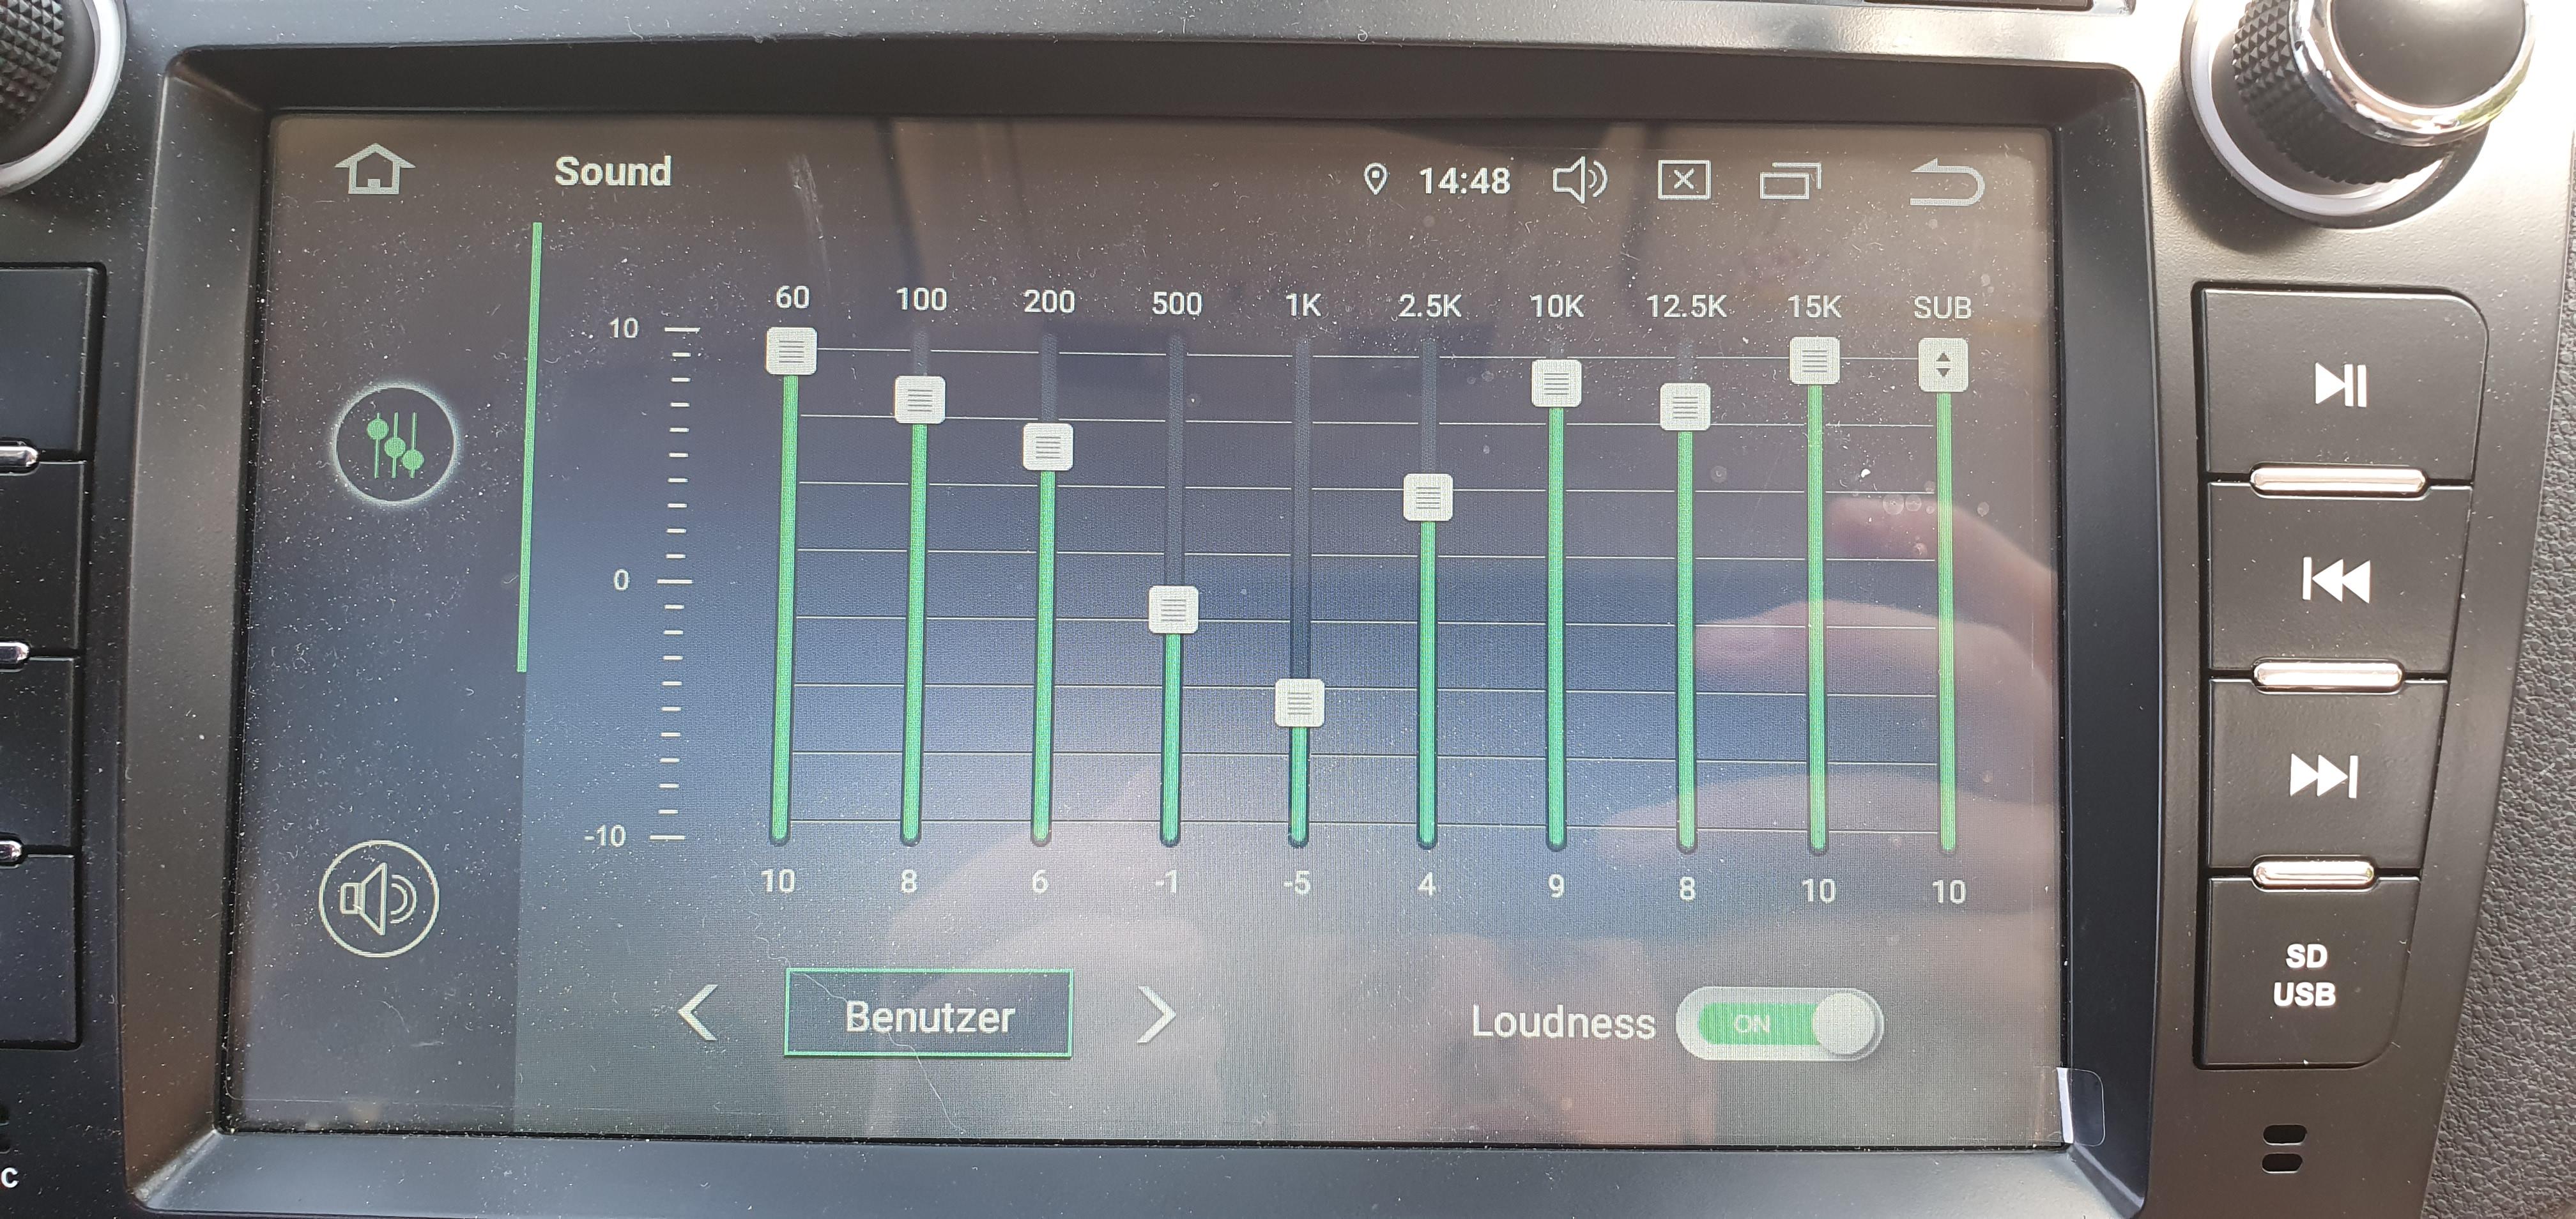 best equalizer settings for bass samsung s10